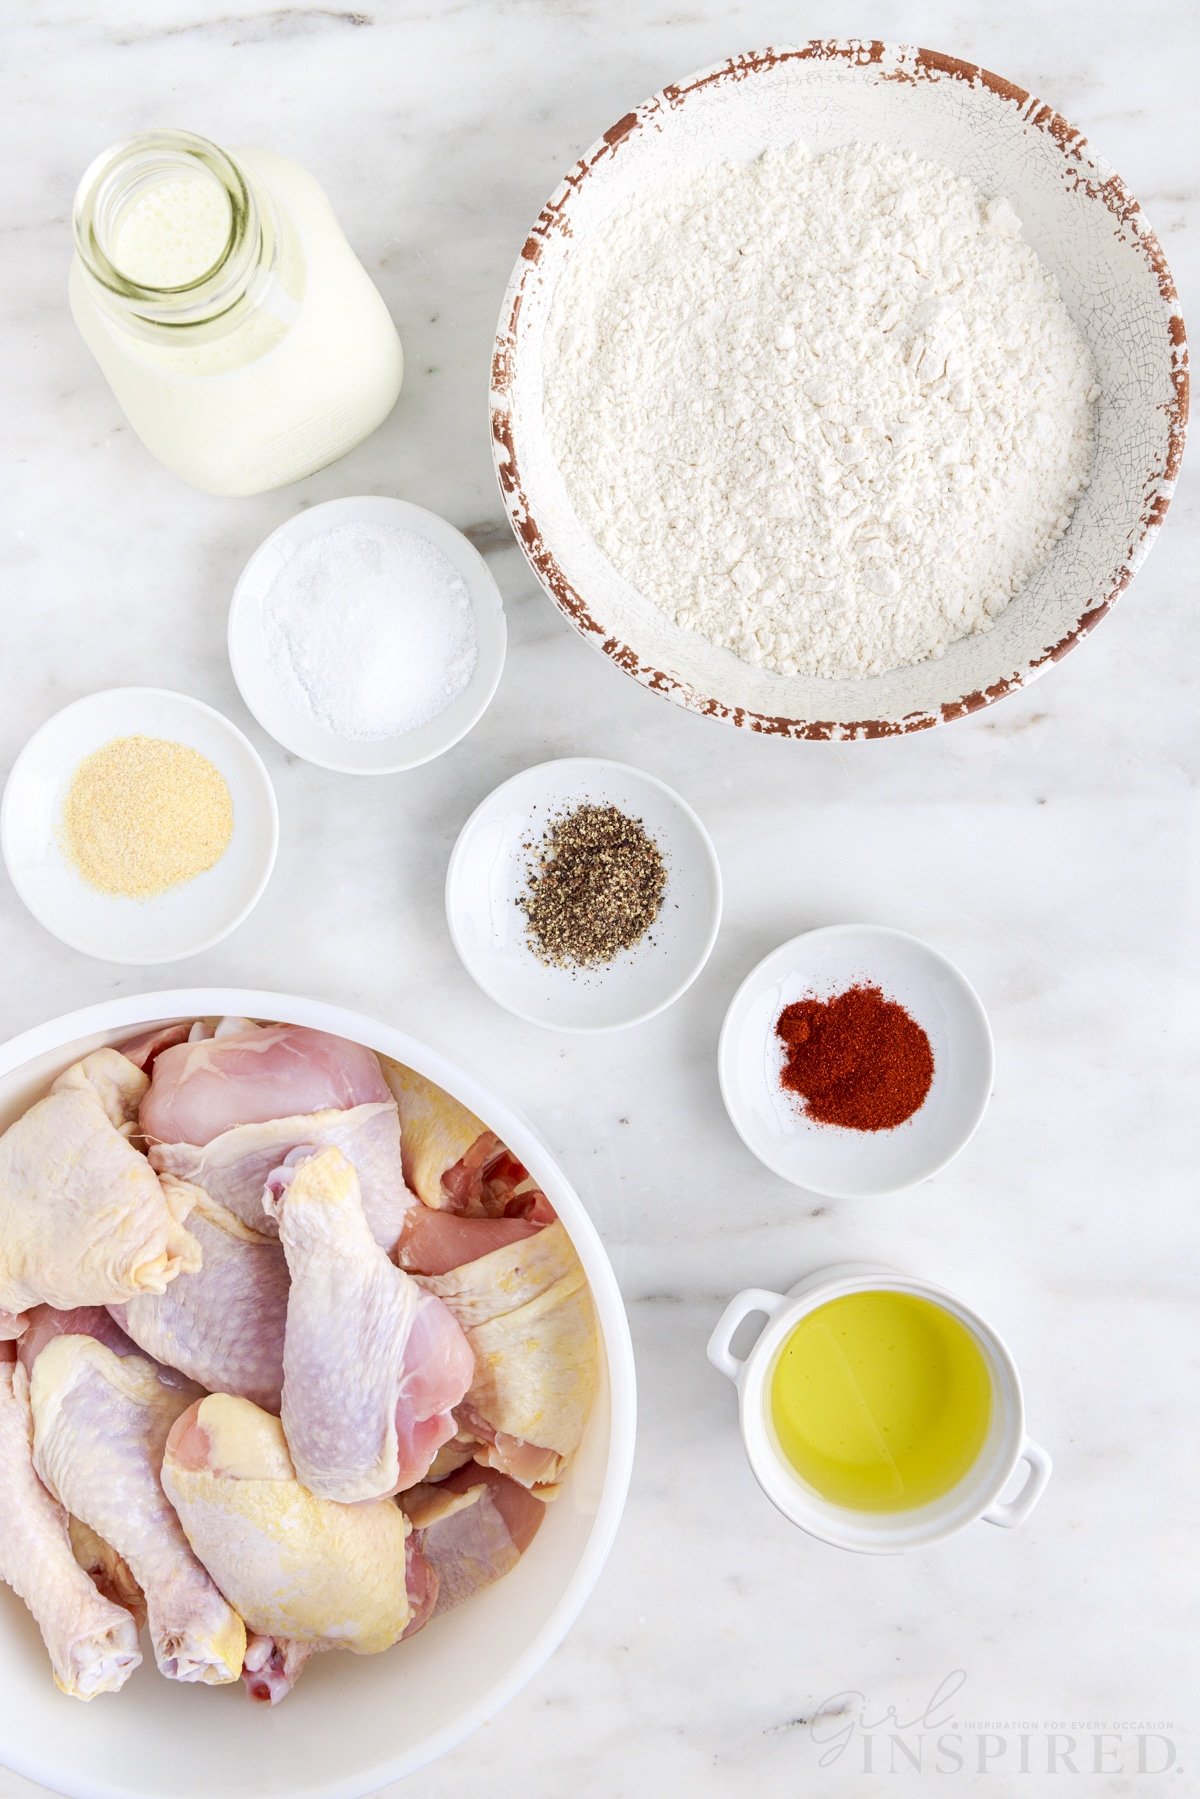 Bowl of chicken drumsticks and thighs, bowl of flour, jug of buttermilk, bowl of vegetable oil, bowls of seasoning, on a white marble countertop.